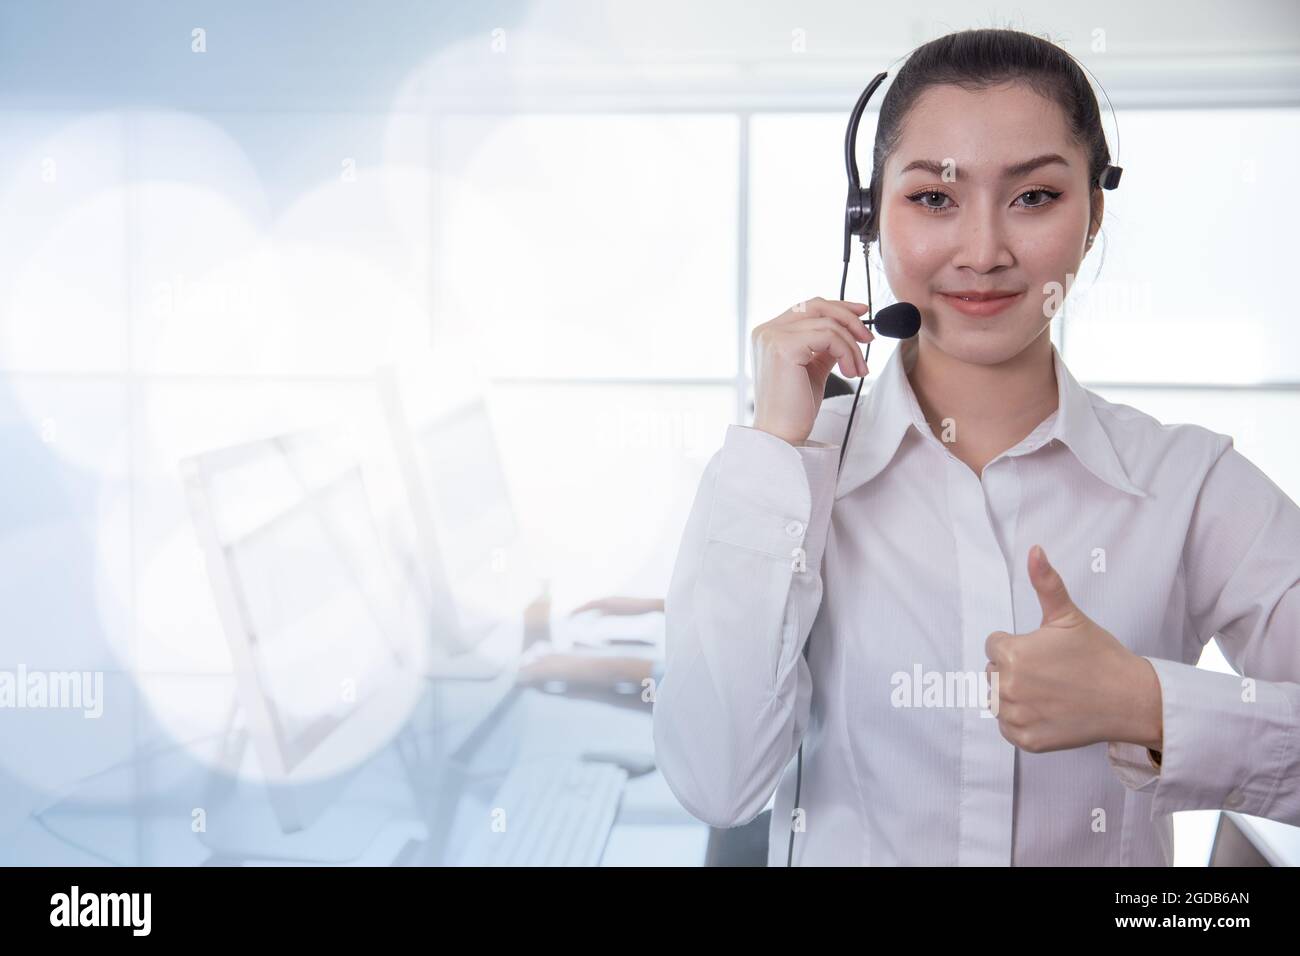 Portrait Asian callcenter operator thumbs up. Helpdesk support phone call customer care female staff smiling with headset good service concept with sp Stock Photo